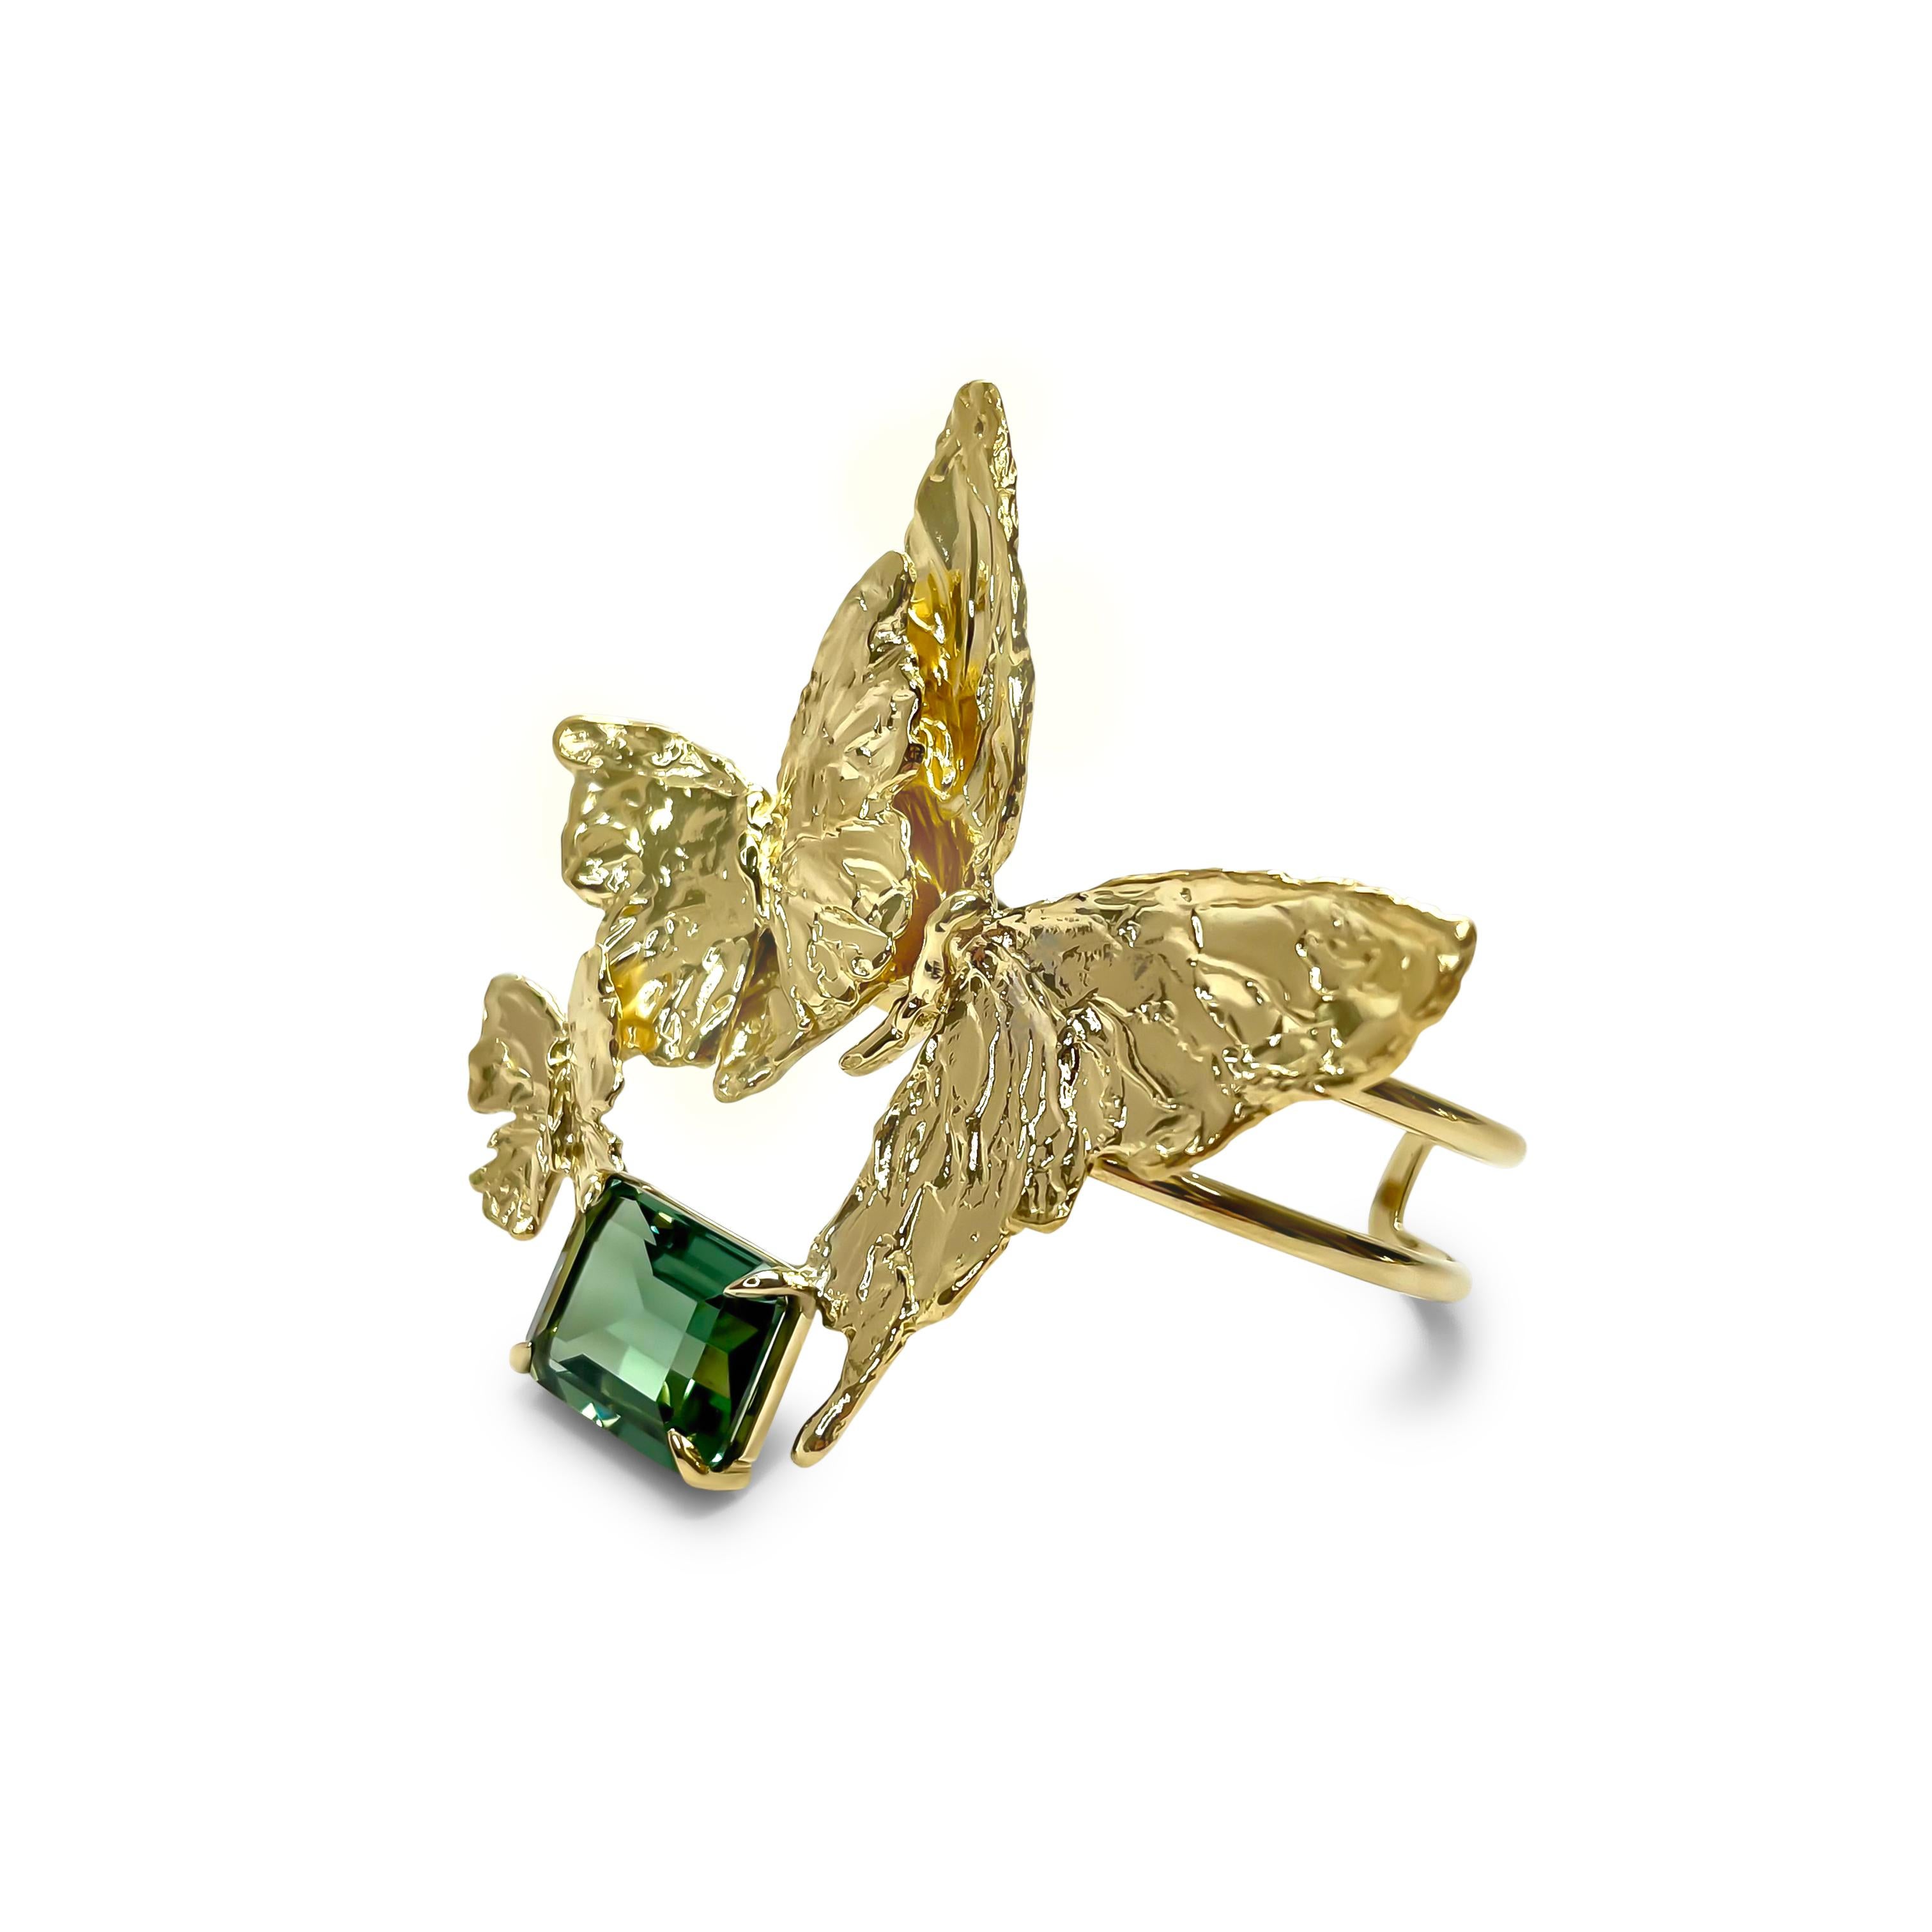 Intention: Sheer drama... the good kind!

Design: A trio of butterflies surround an emerald cut green quartz in this stunning cuff. Embodying the intention of our BELIEVE collection, this piece demands that you think big and bold(ly)!

Style